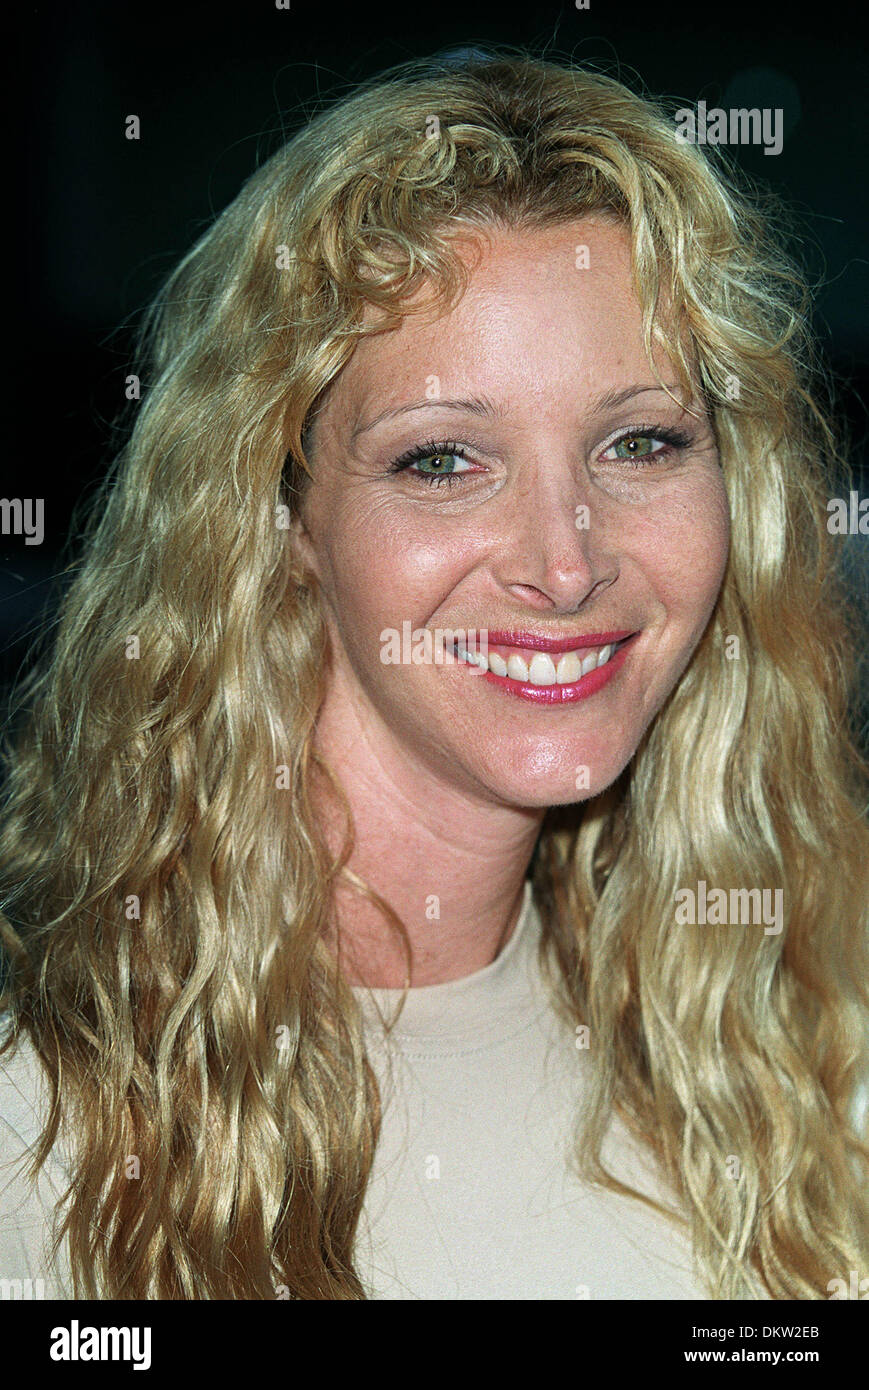 LISA KUDROW ACTRICE.''Amis''.WESTWOOD, LOS ANGELES, USA.23/07/2001.BL17G36AC. Banque D'Images